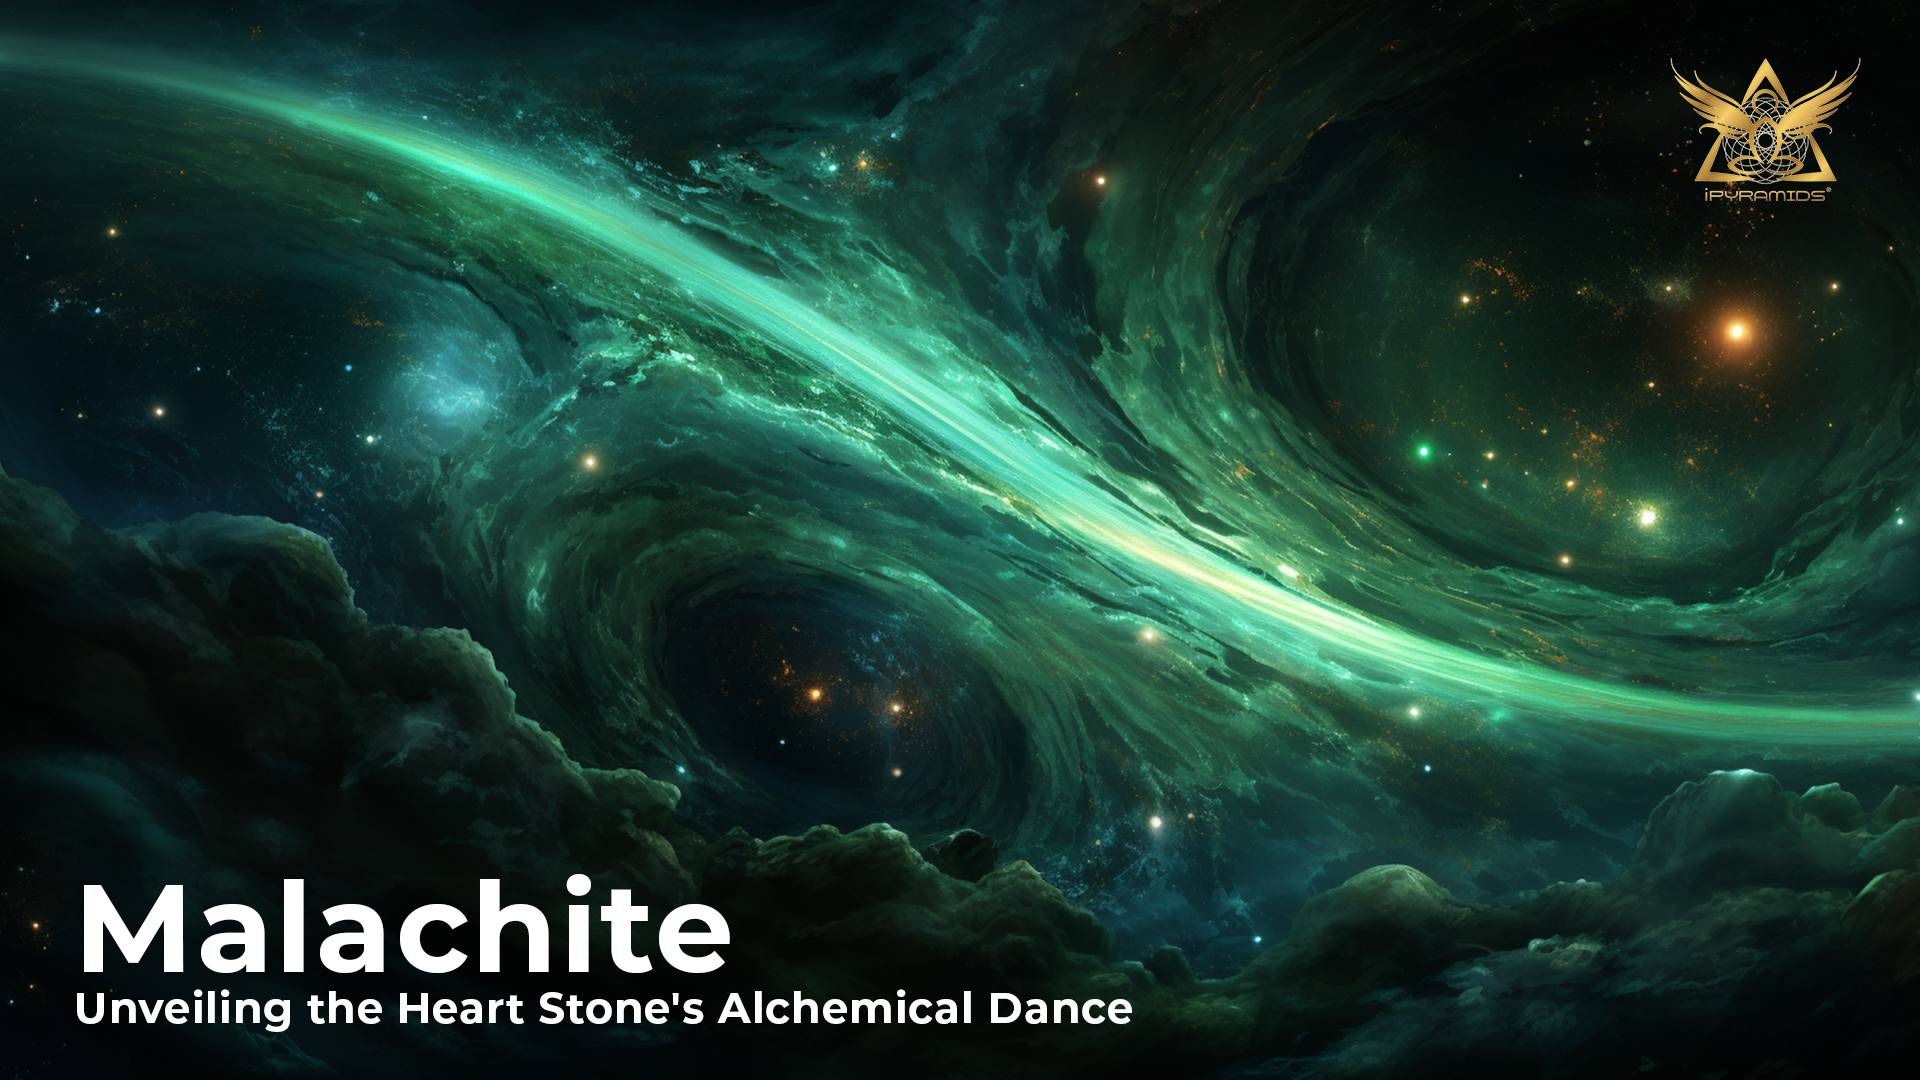 Malachite: Unveiling the Heart Stone's Alchemical Dance